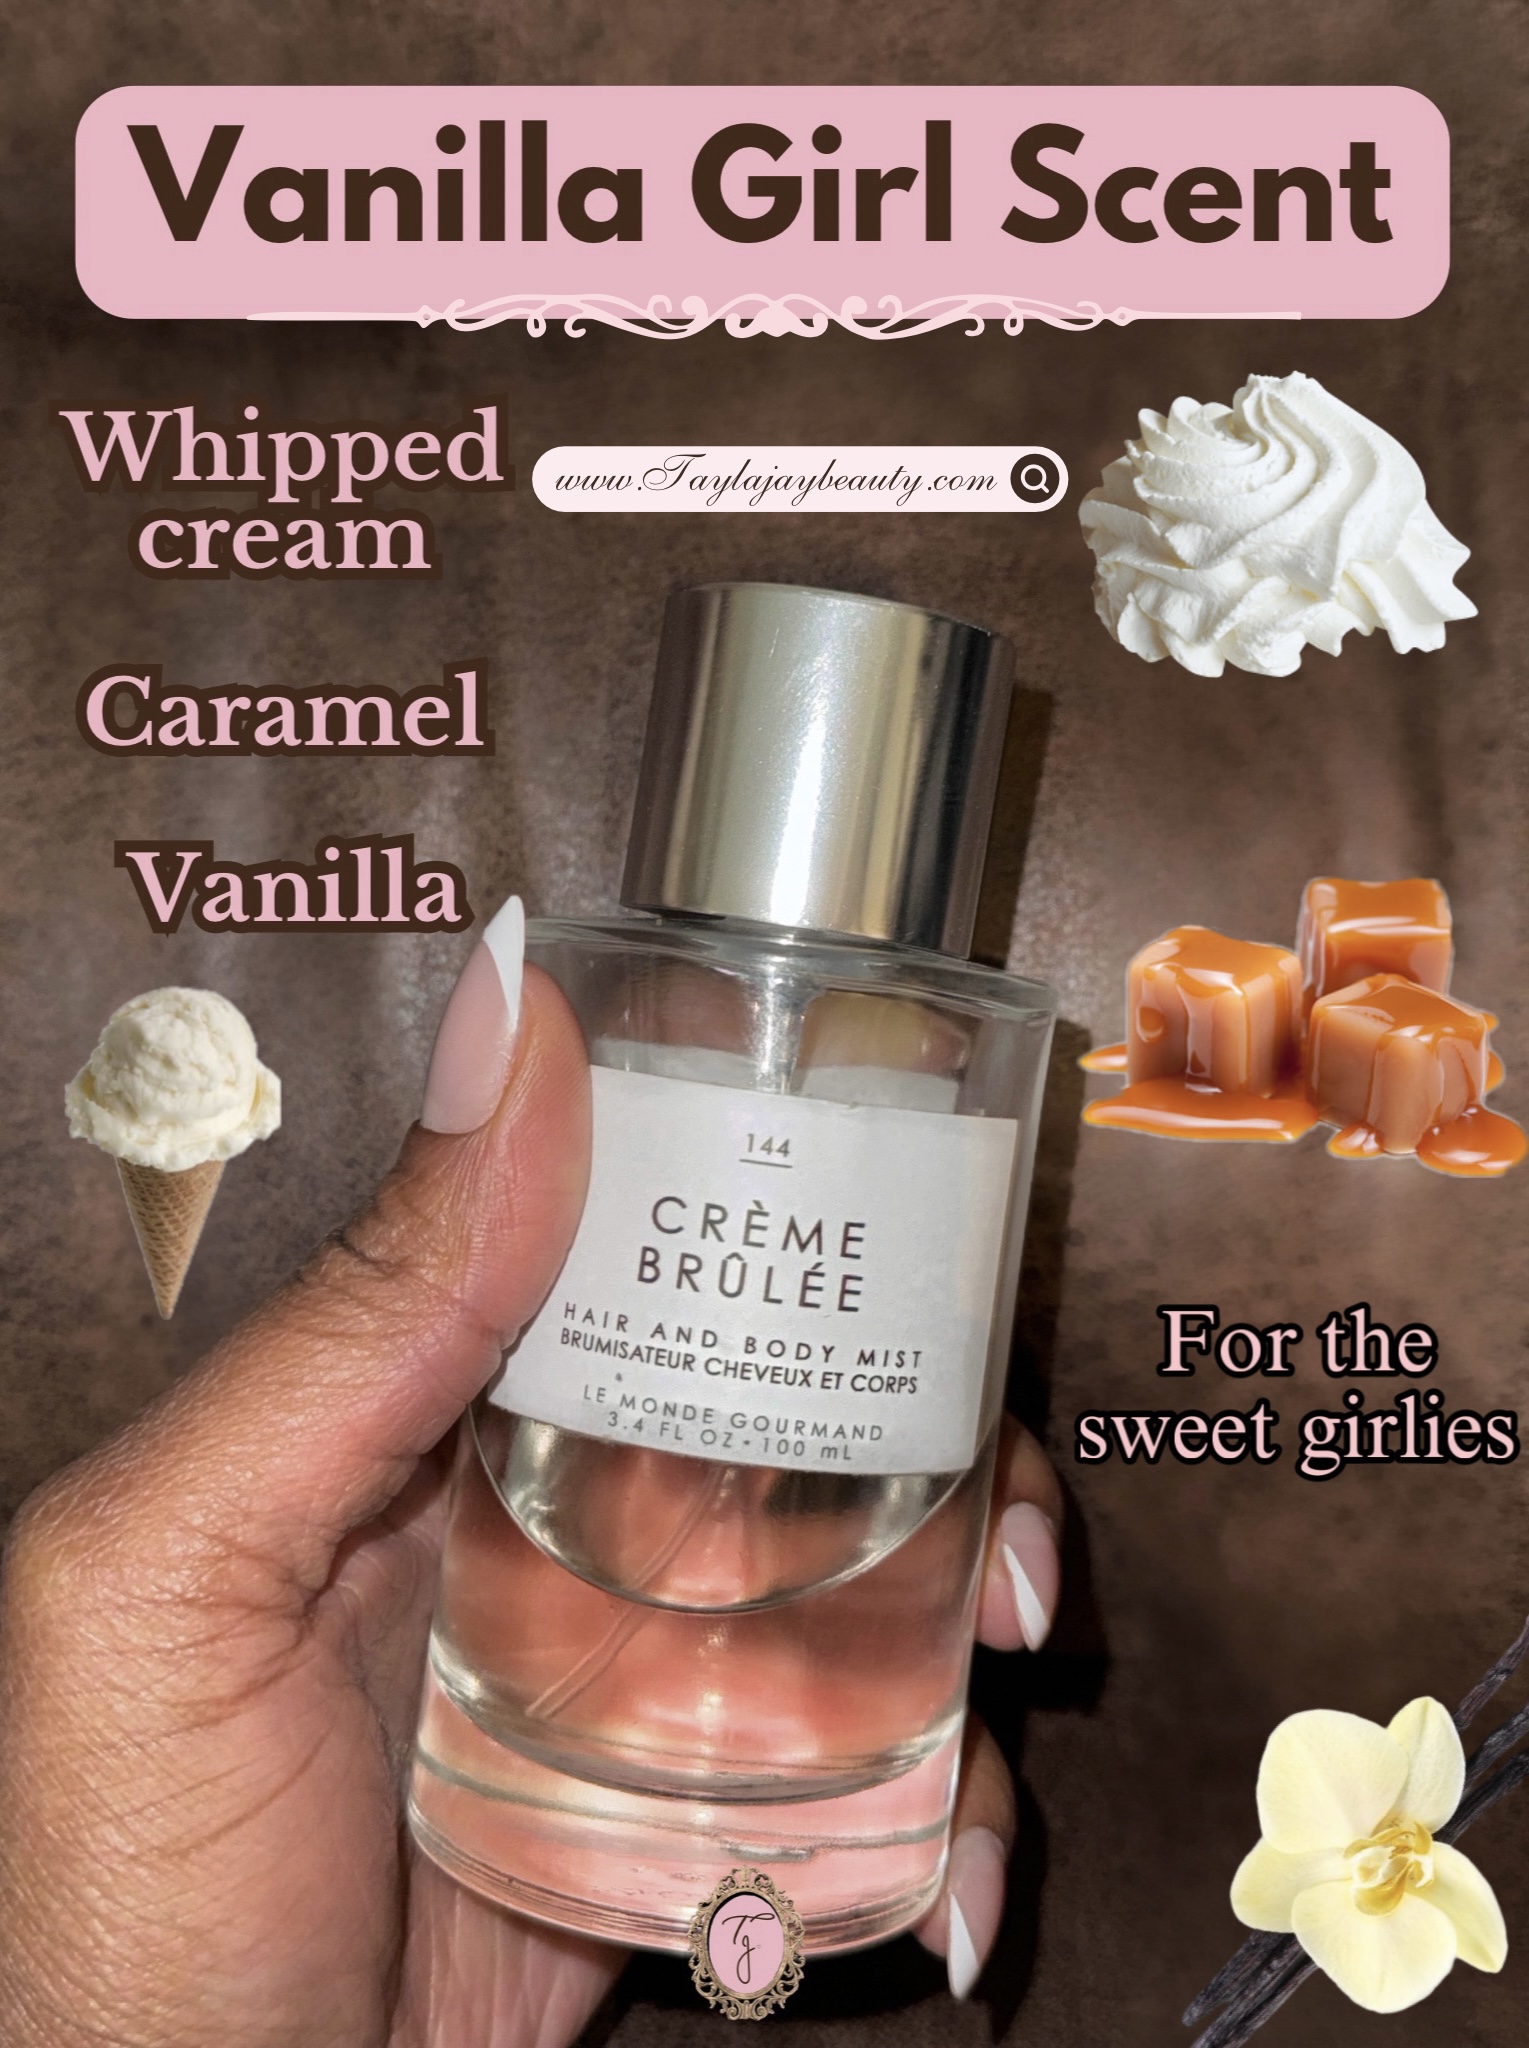 This Vanilla Hair & Body Mist Makes You Smell Amazing